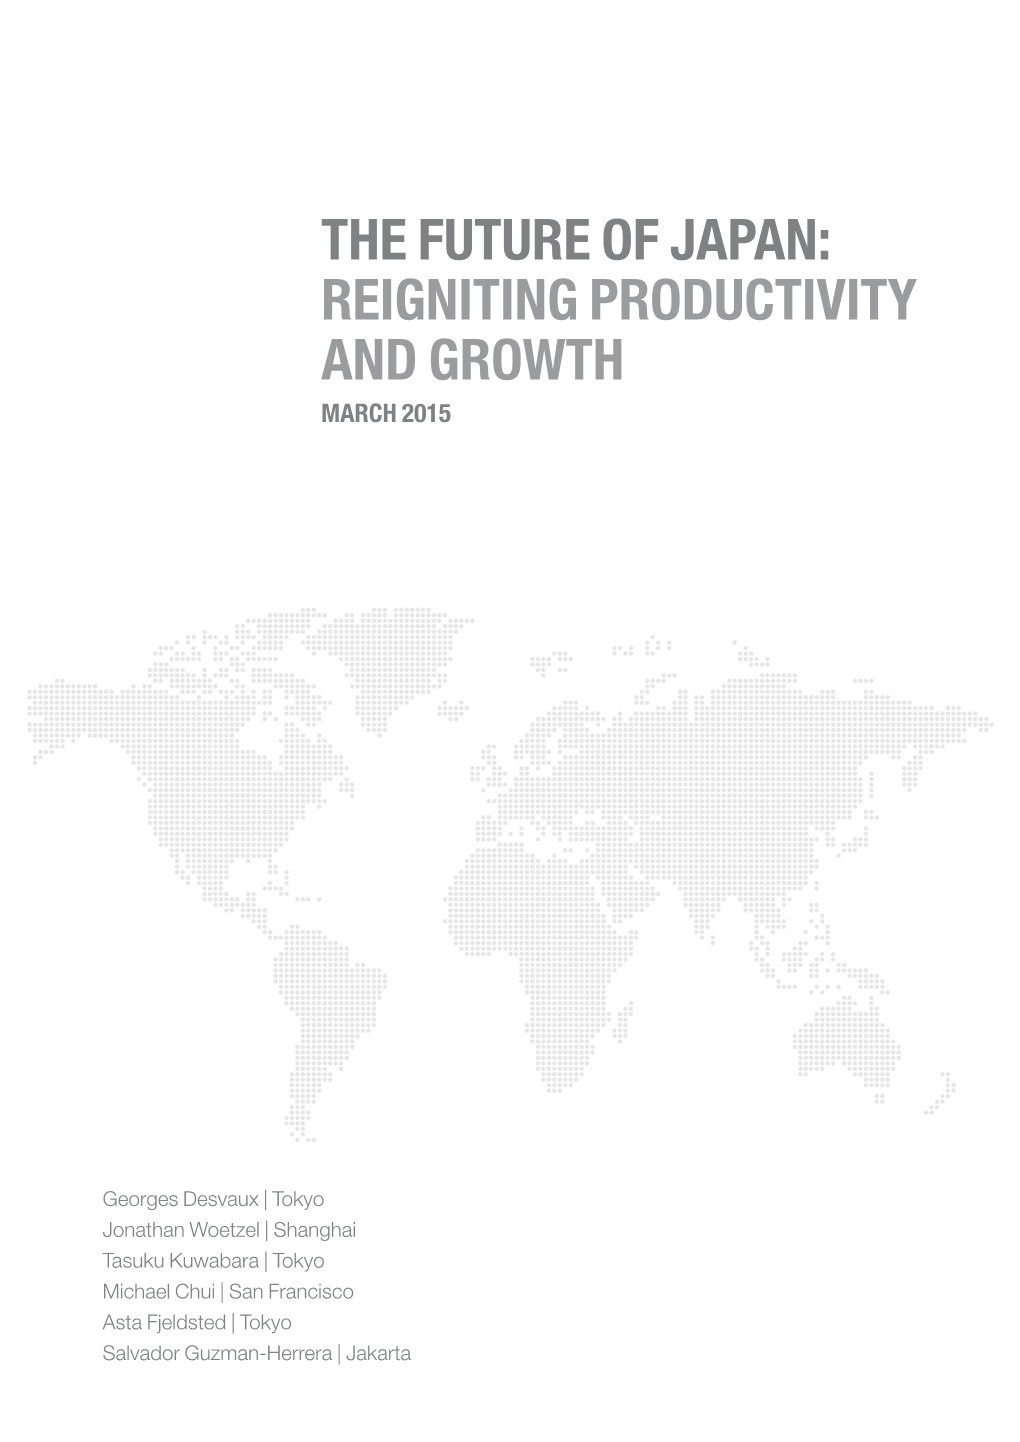 The Future of Japan: Reigniting Productivity and Growth